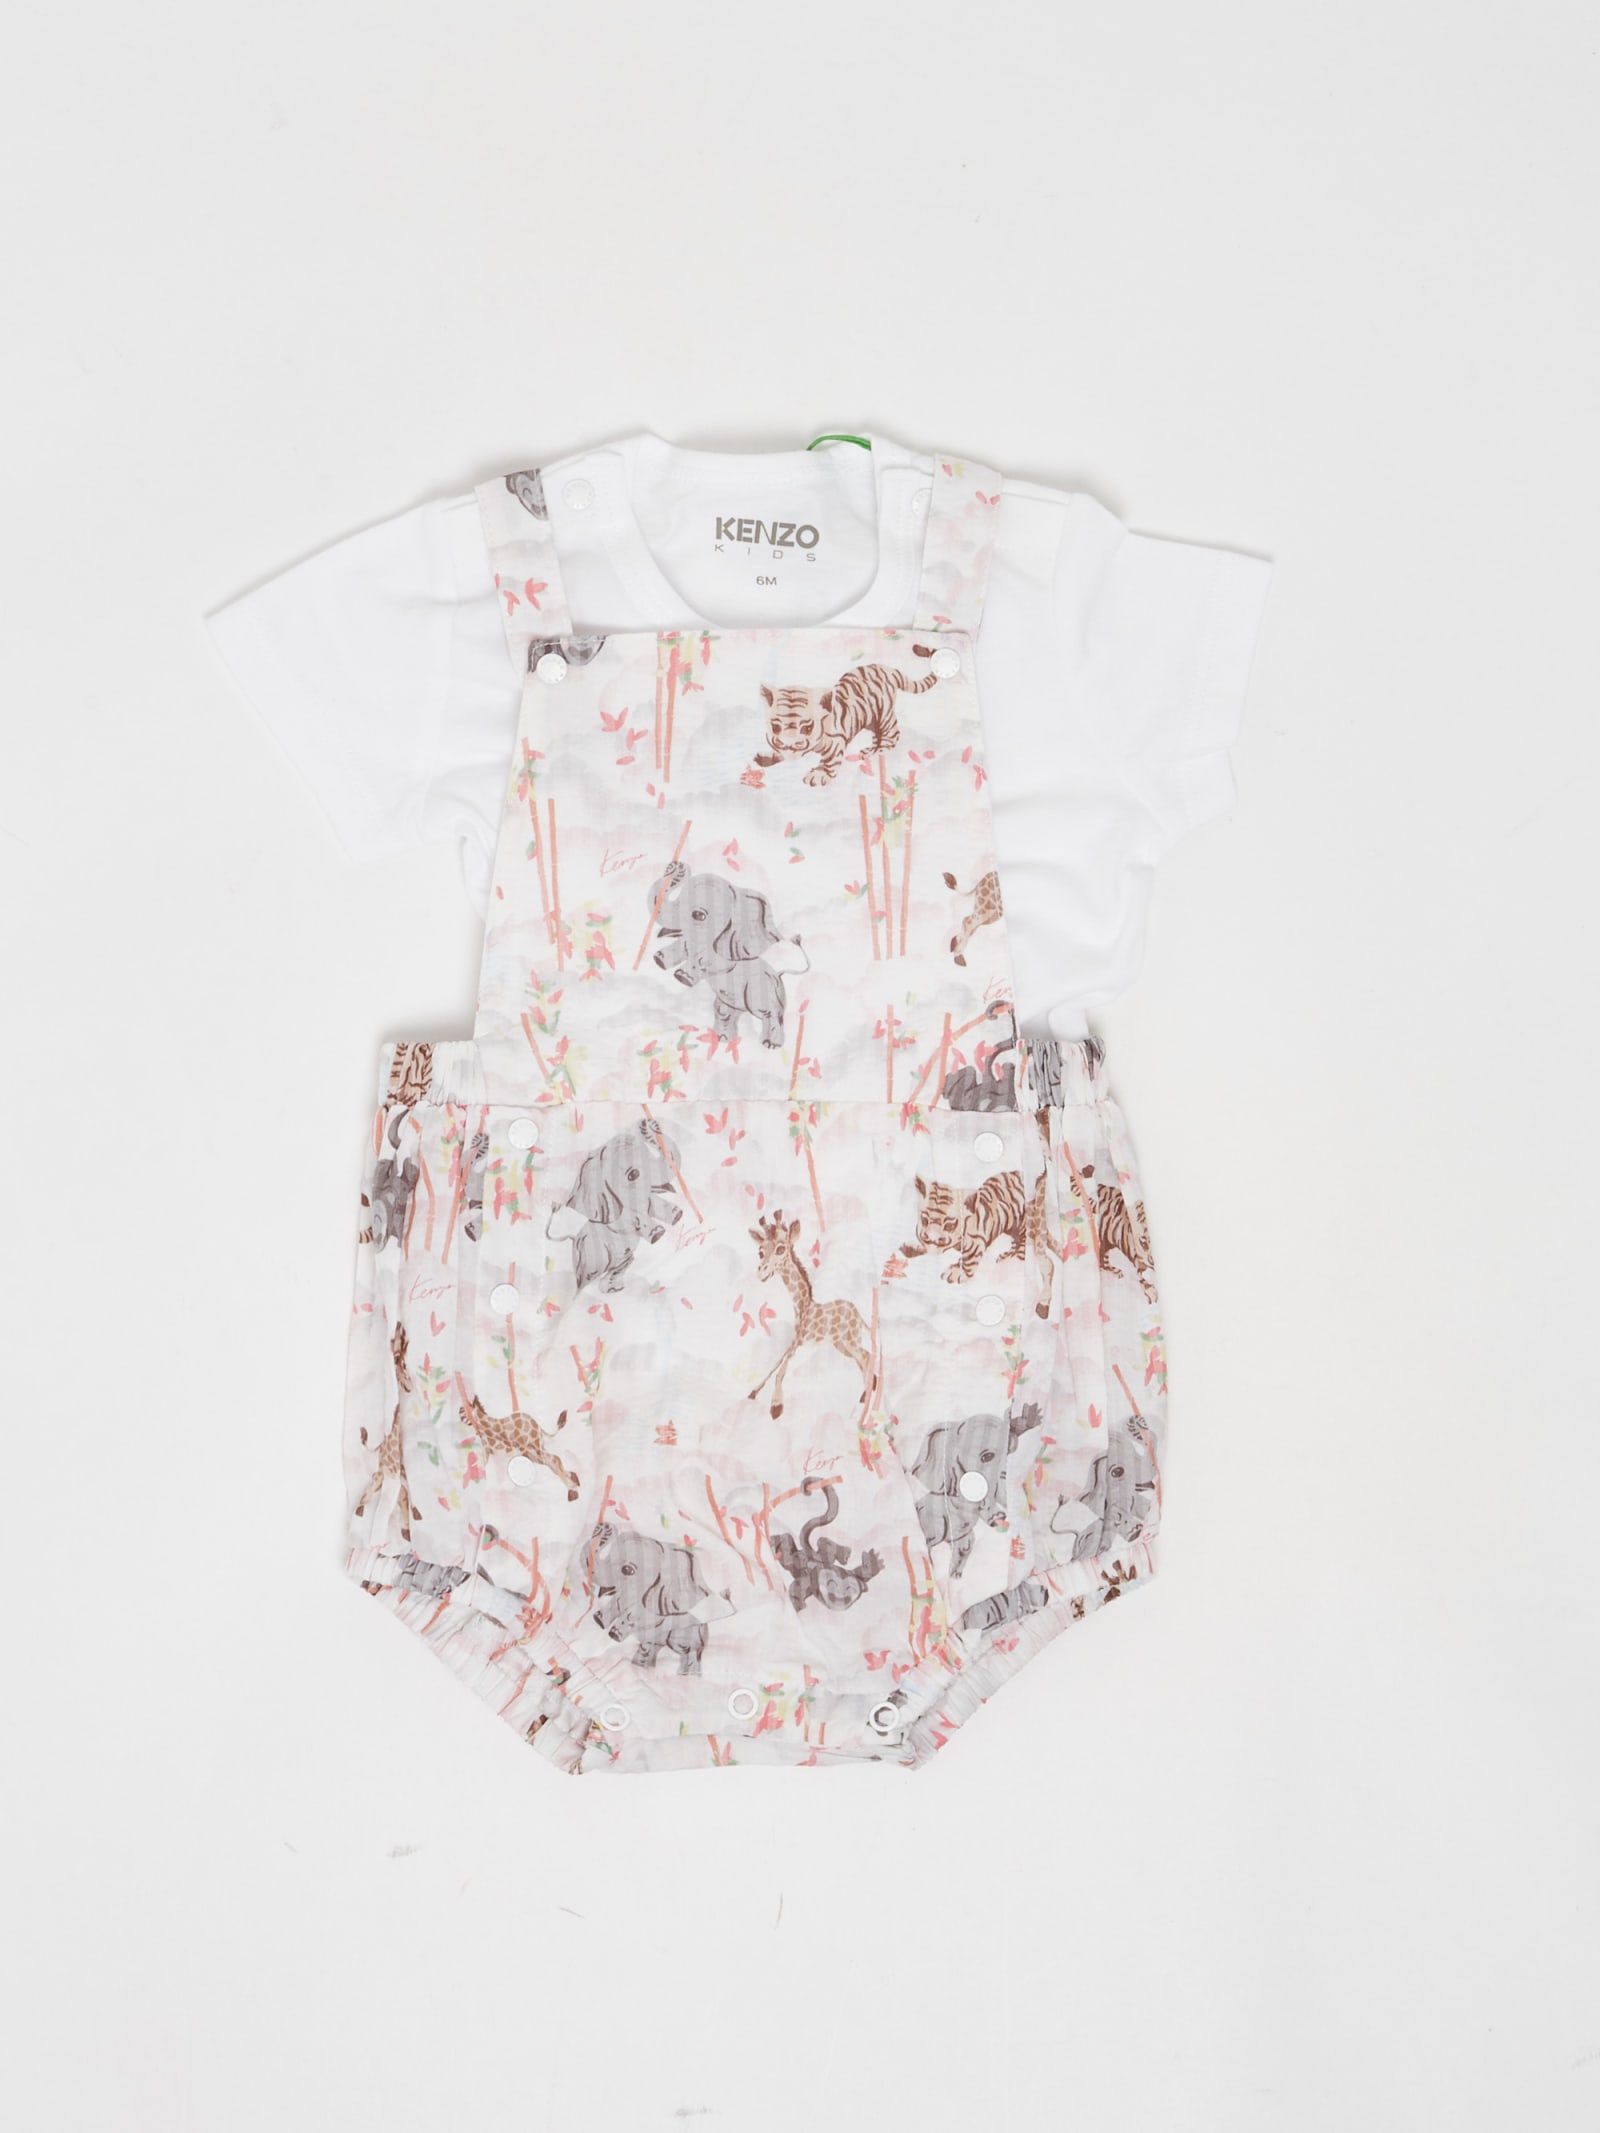 Kenzo Babies' Suits Suit In Bianco-rosa | ModeSens